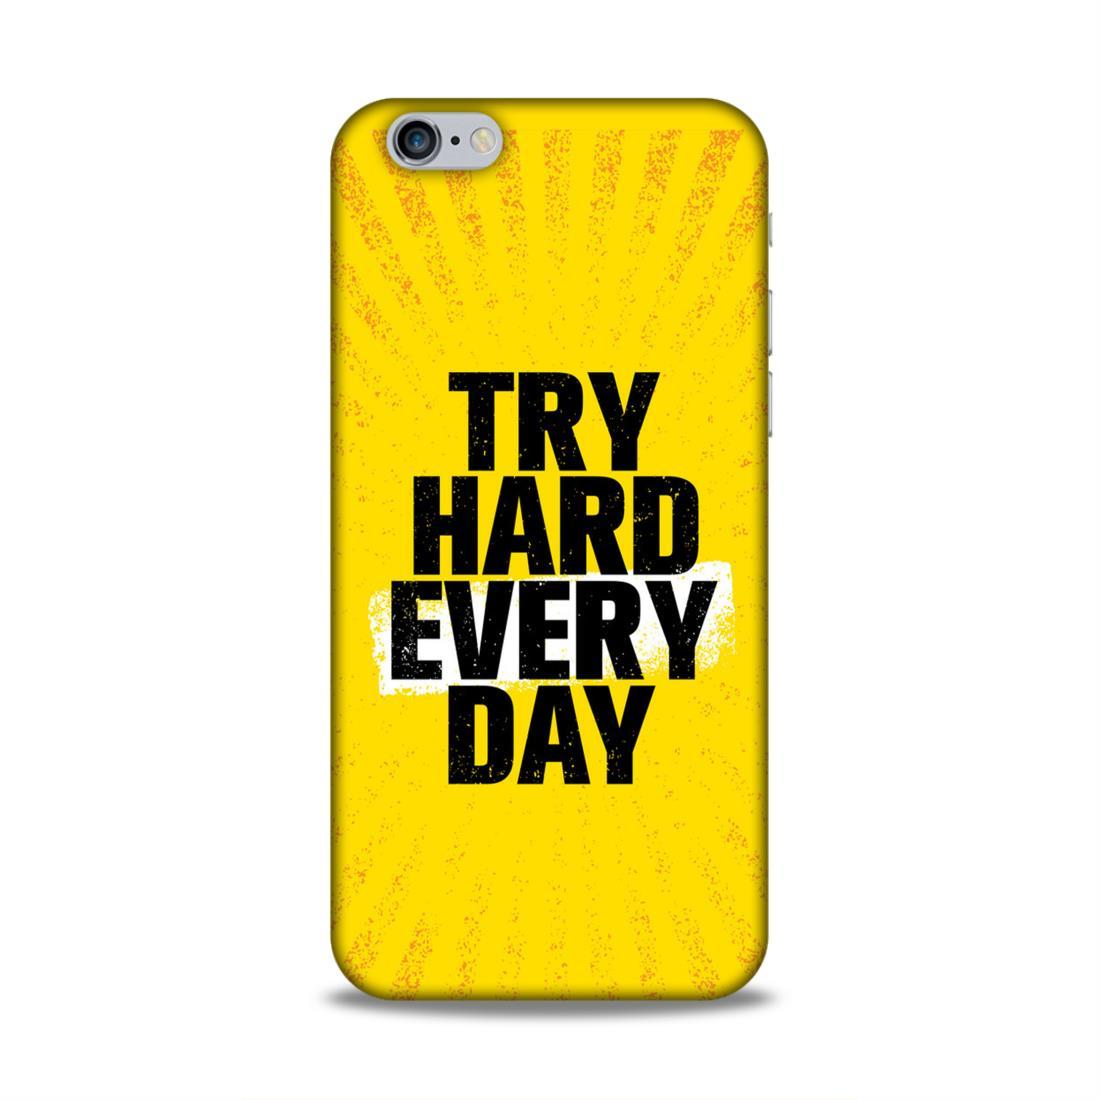 Try Hard Every Day iPhone 6s Mobile Case Cover